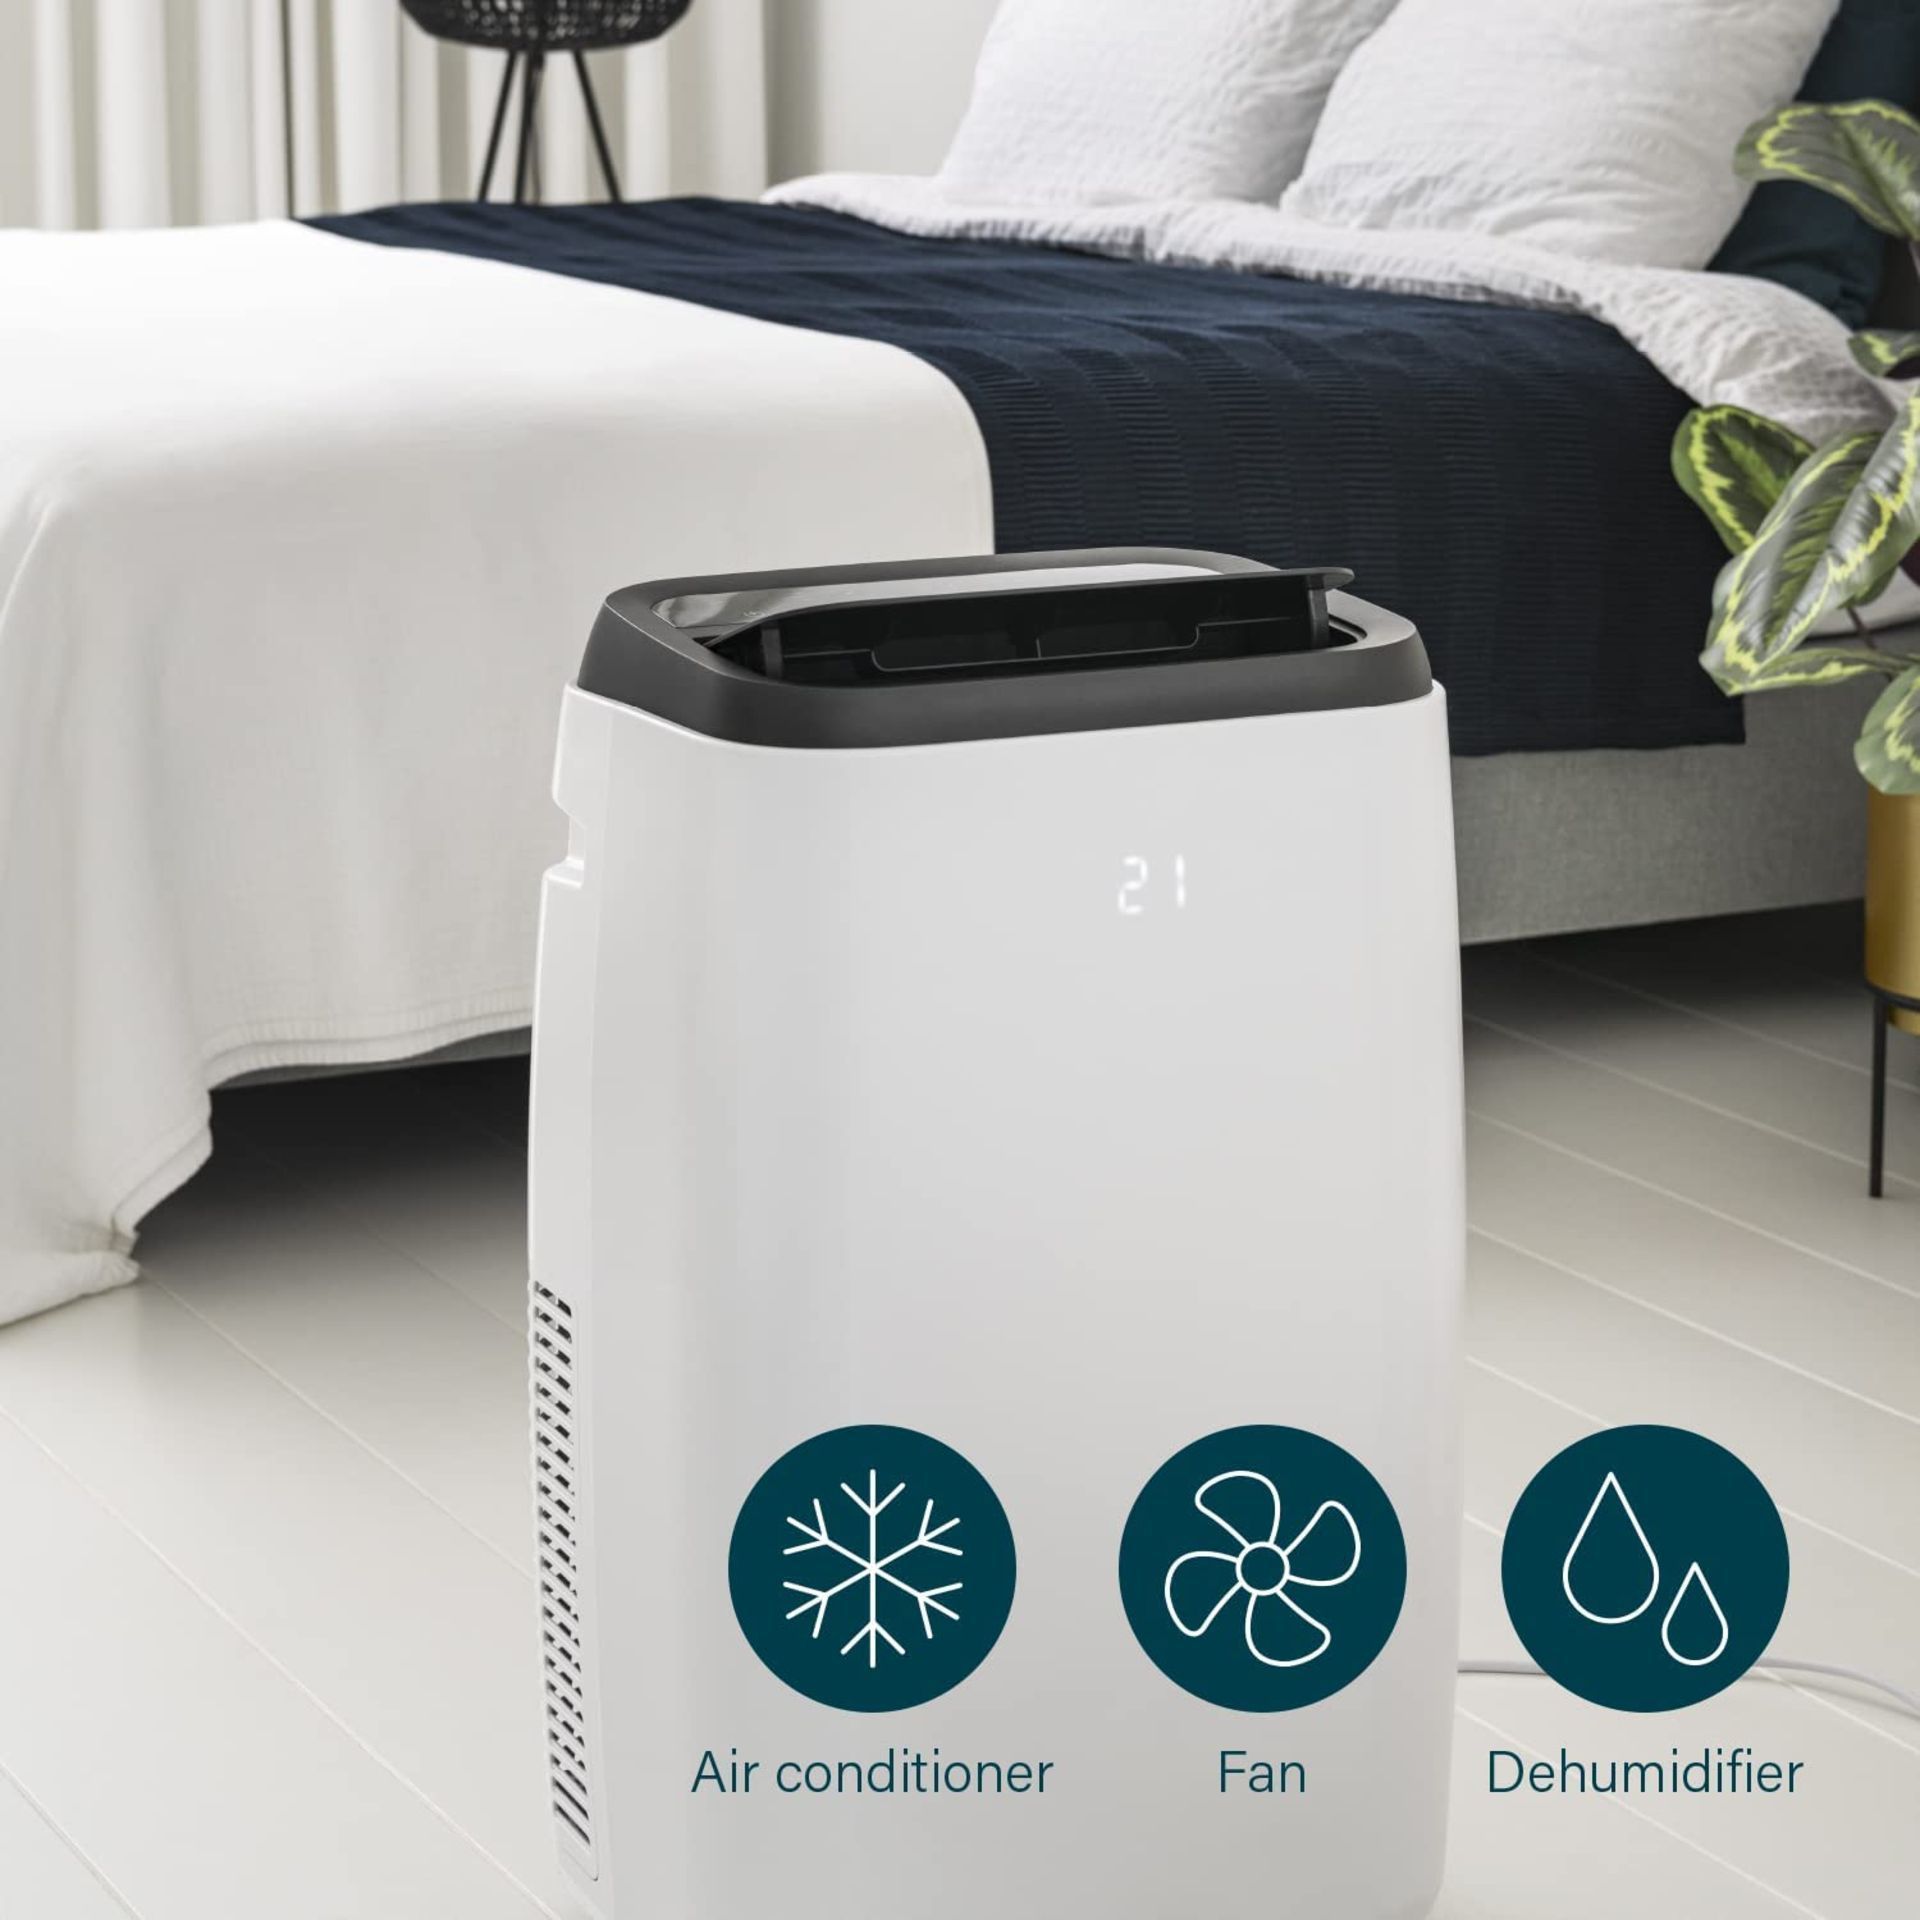 Princess Mobile Air Conditioner. 3 IN 1 SMART WIFI. 12,000 BTU, Smart and Voice Control, 3.5 kW, - Image 2 of 2